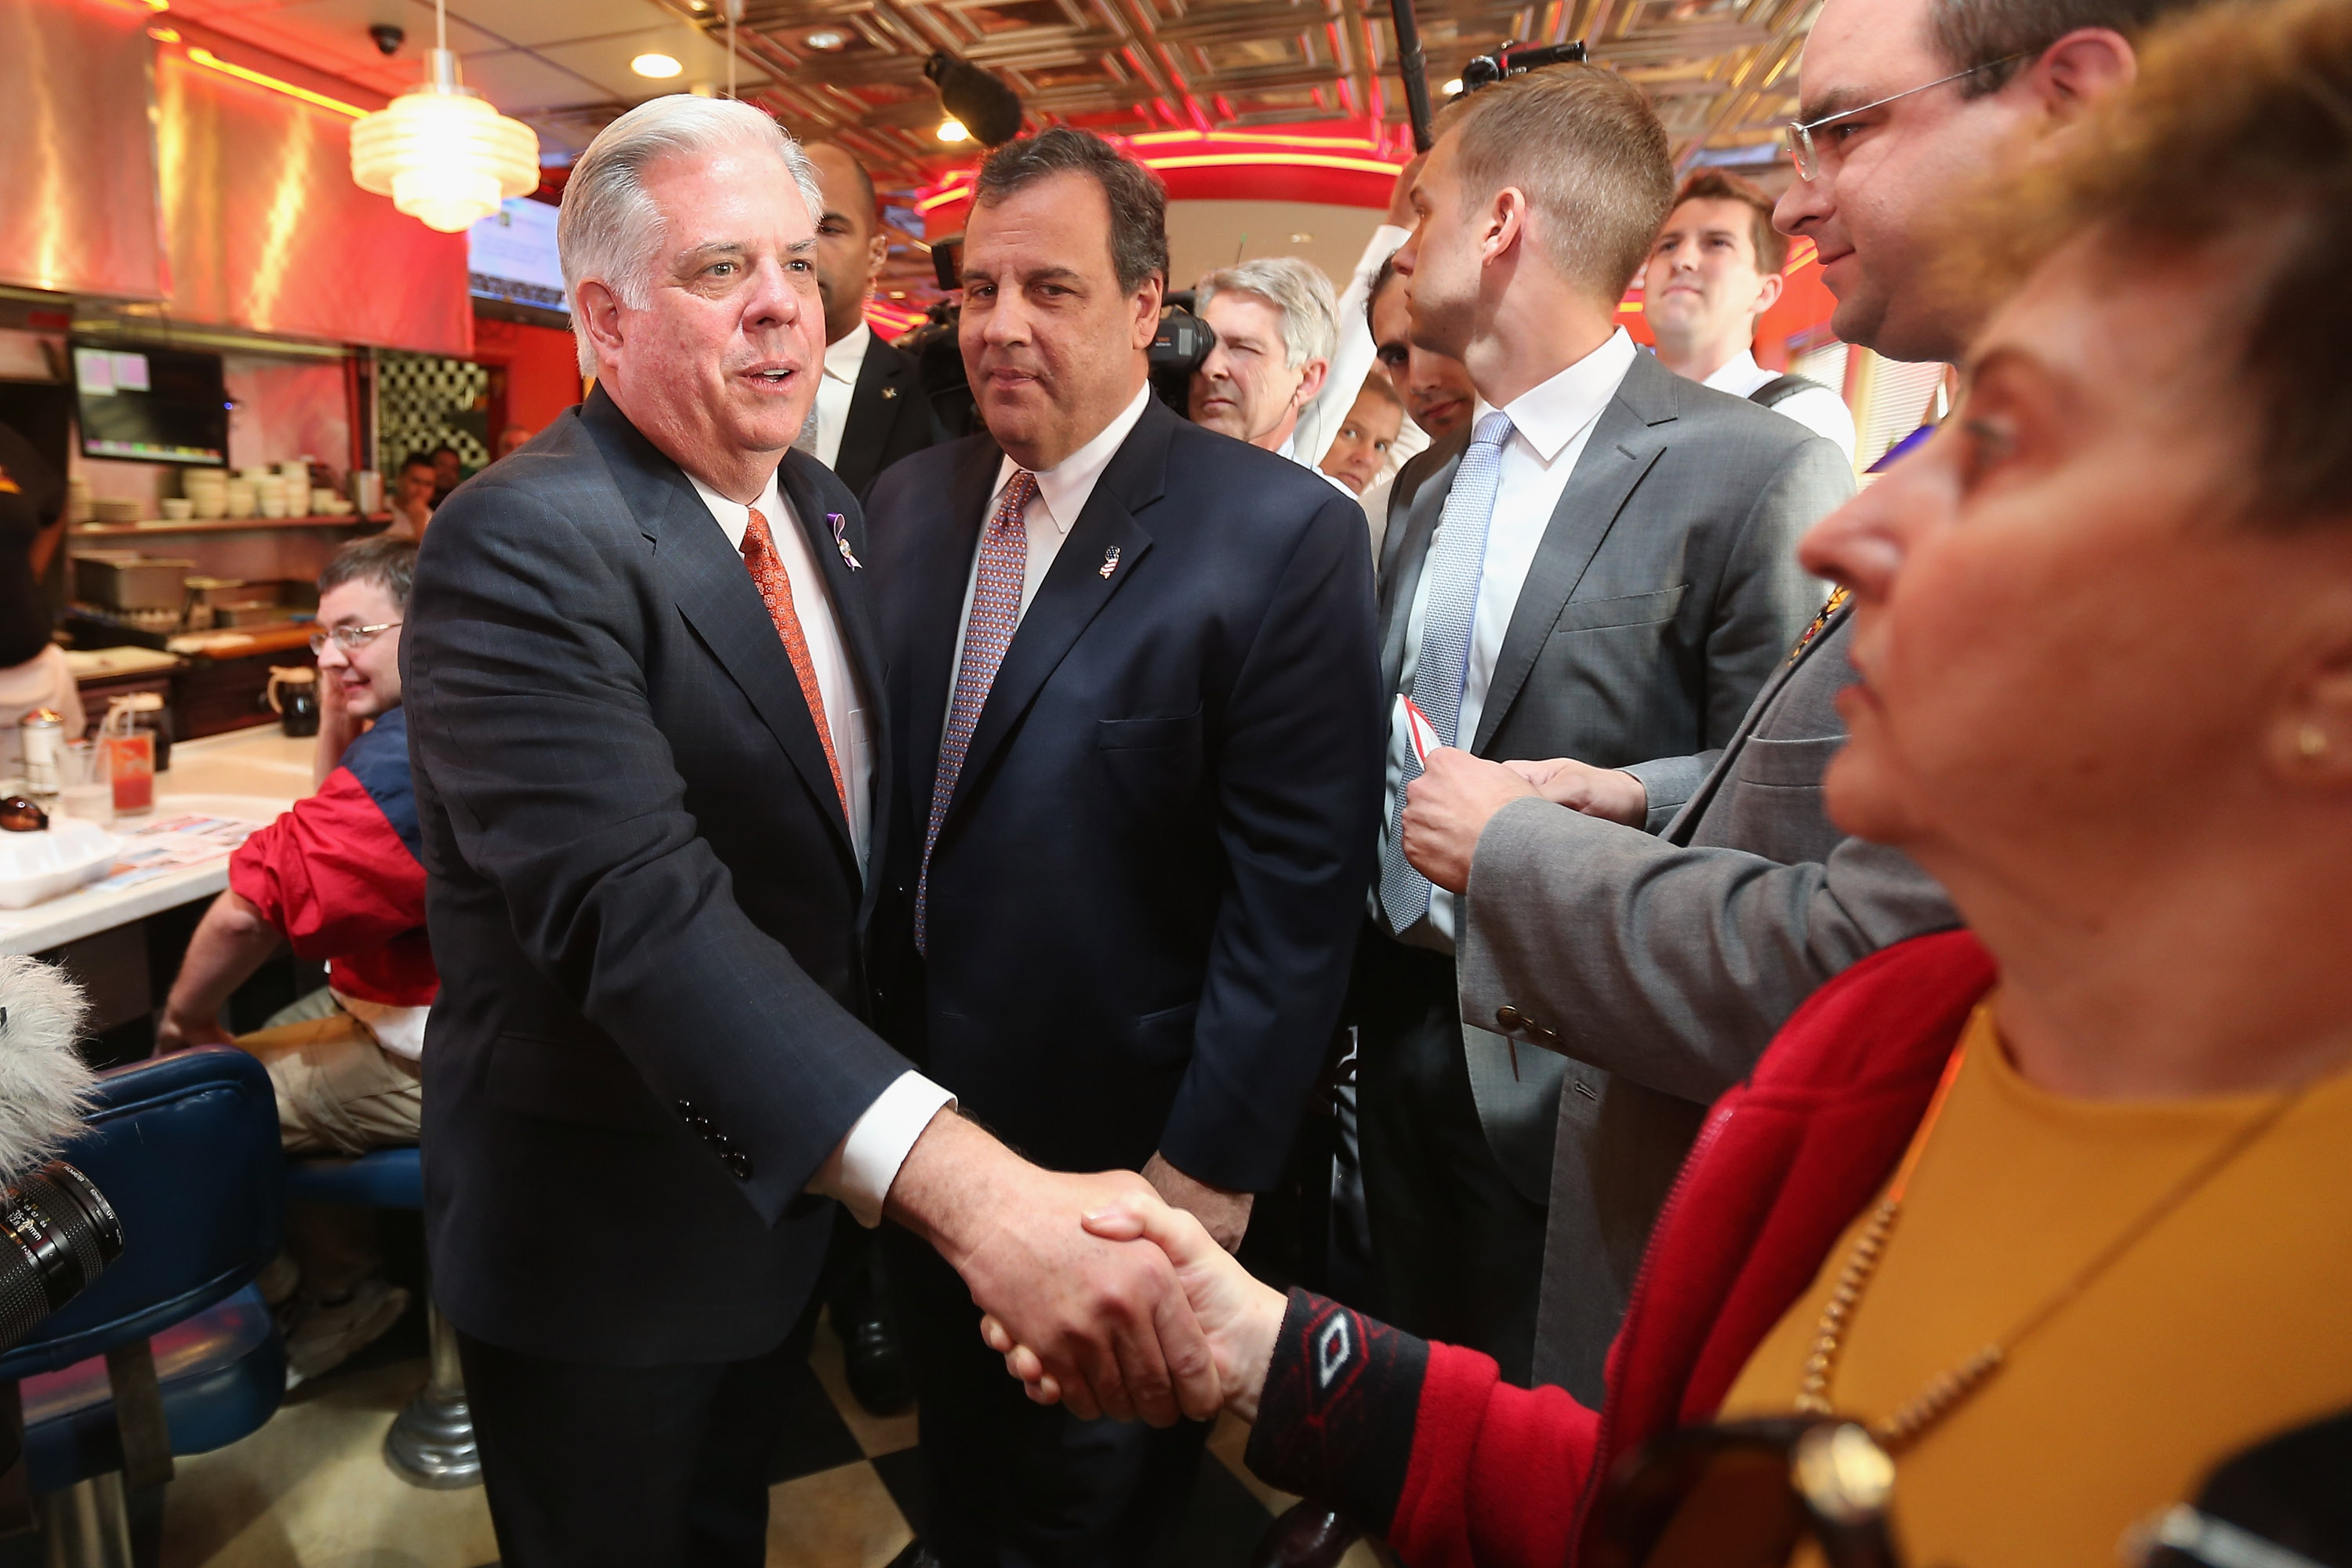 Hogan campaigning with New Jersey Governor Chris Christie. (Getty)